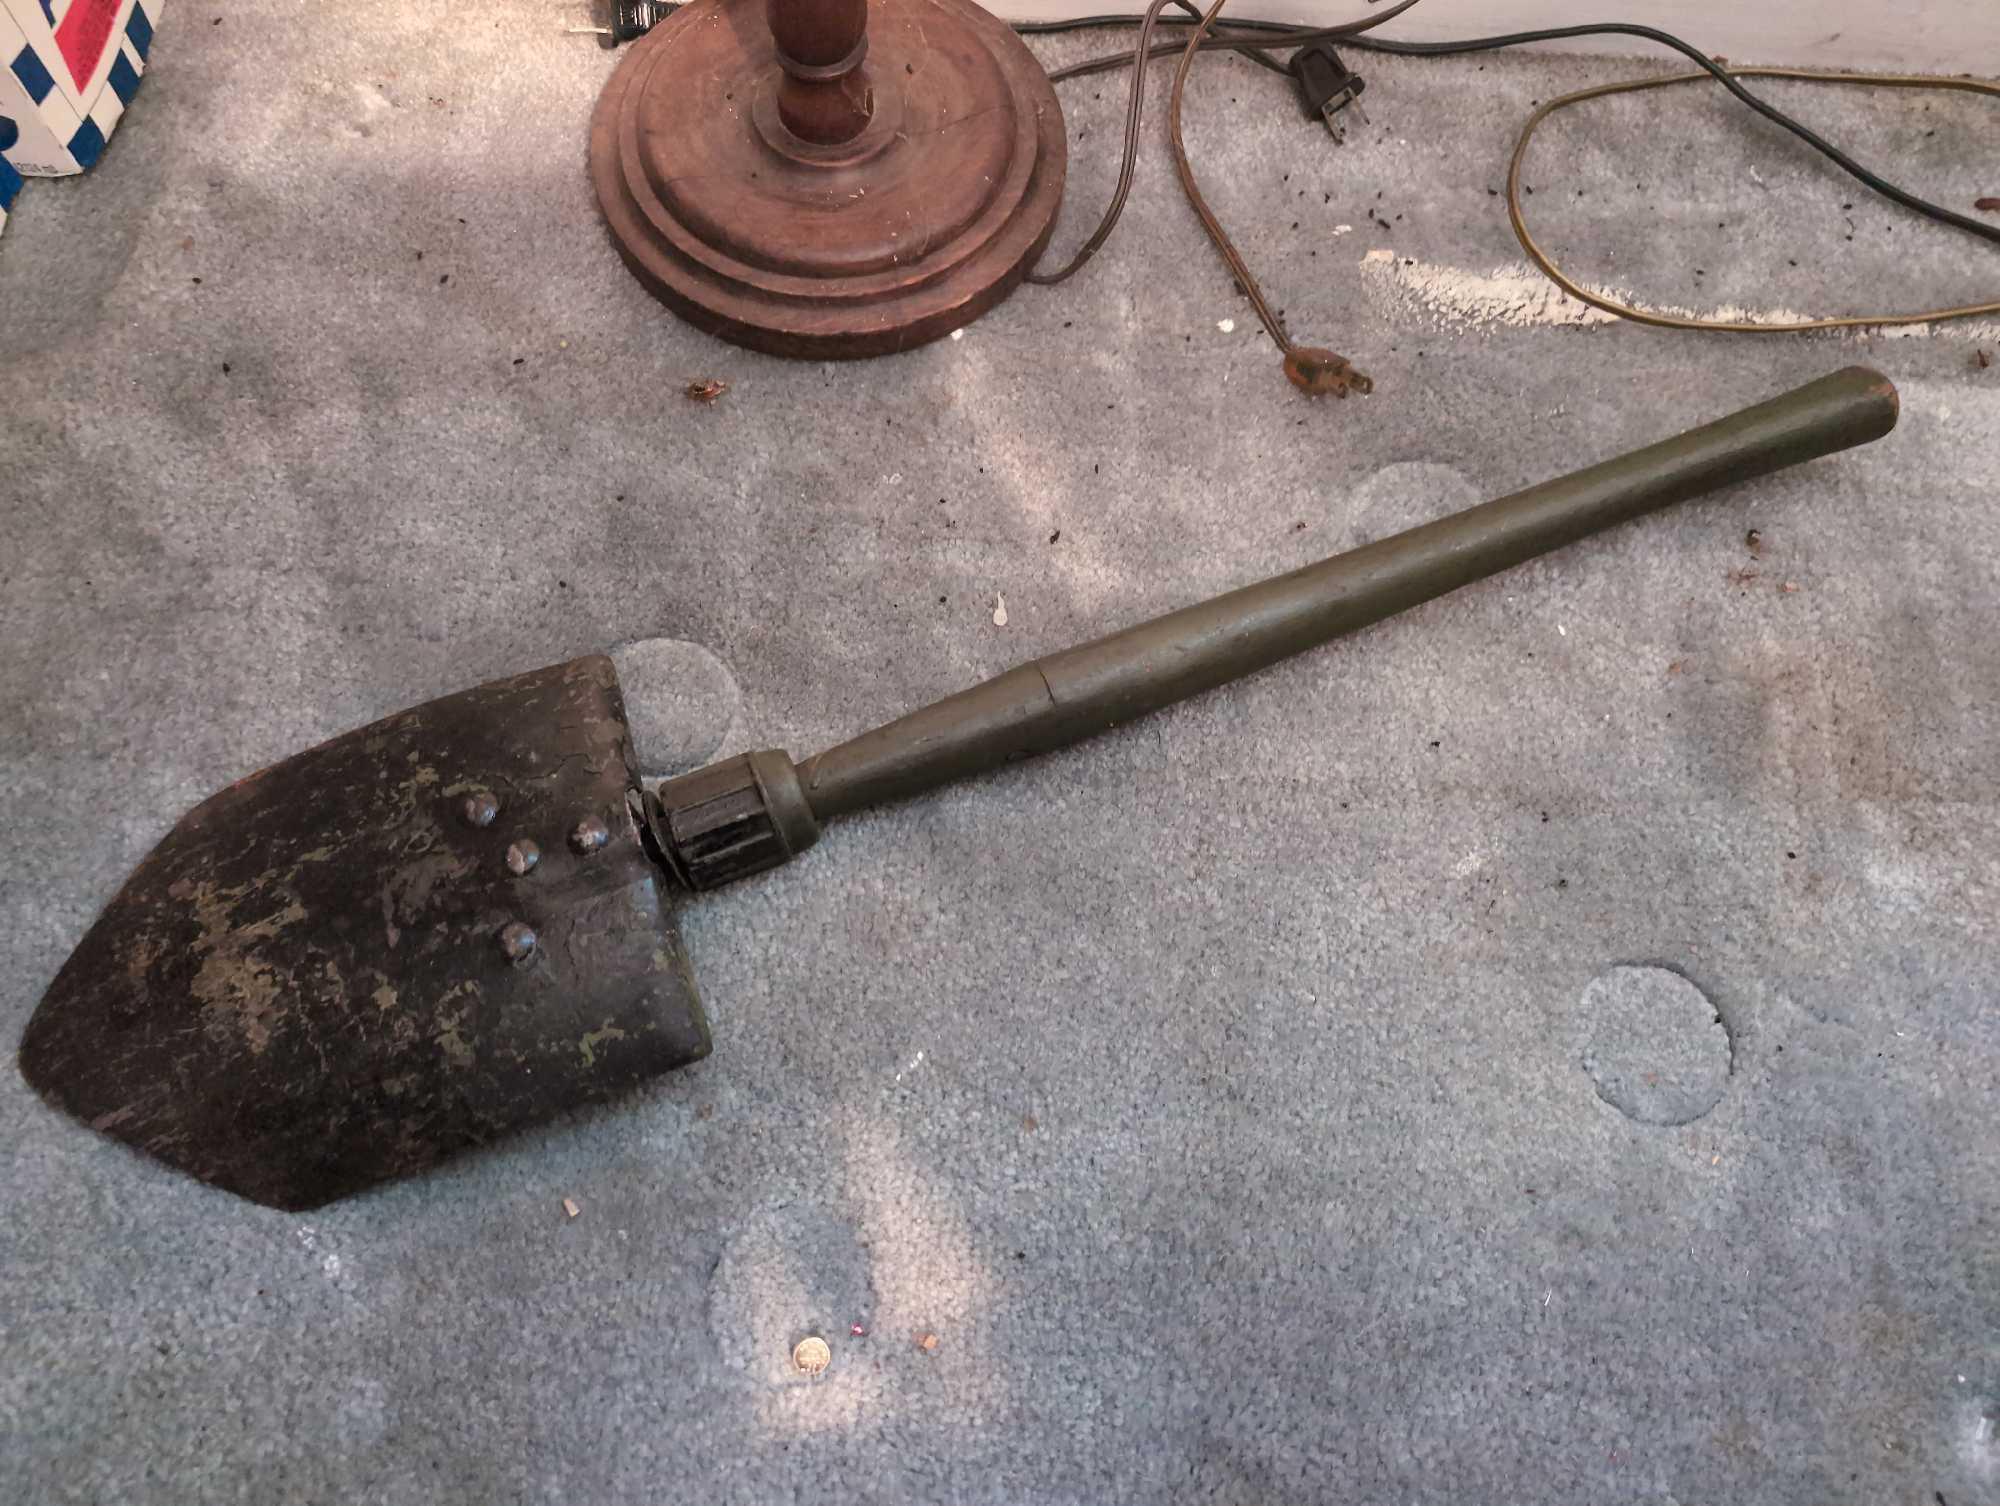 (BR2) 2 PC. LOT TO INCLUDE A VINTAGE GREEN PAINTED FOLDABLE TRENCH SHOVEL 27-1/4"L & A ROUND